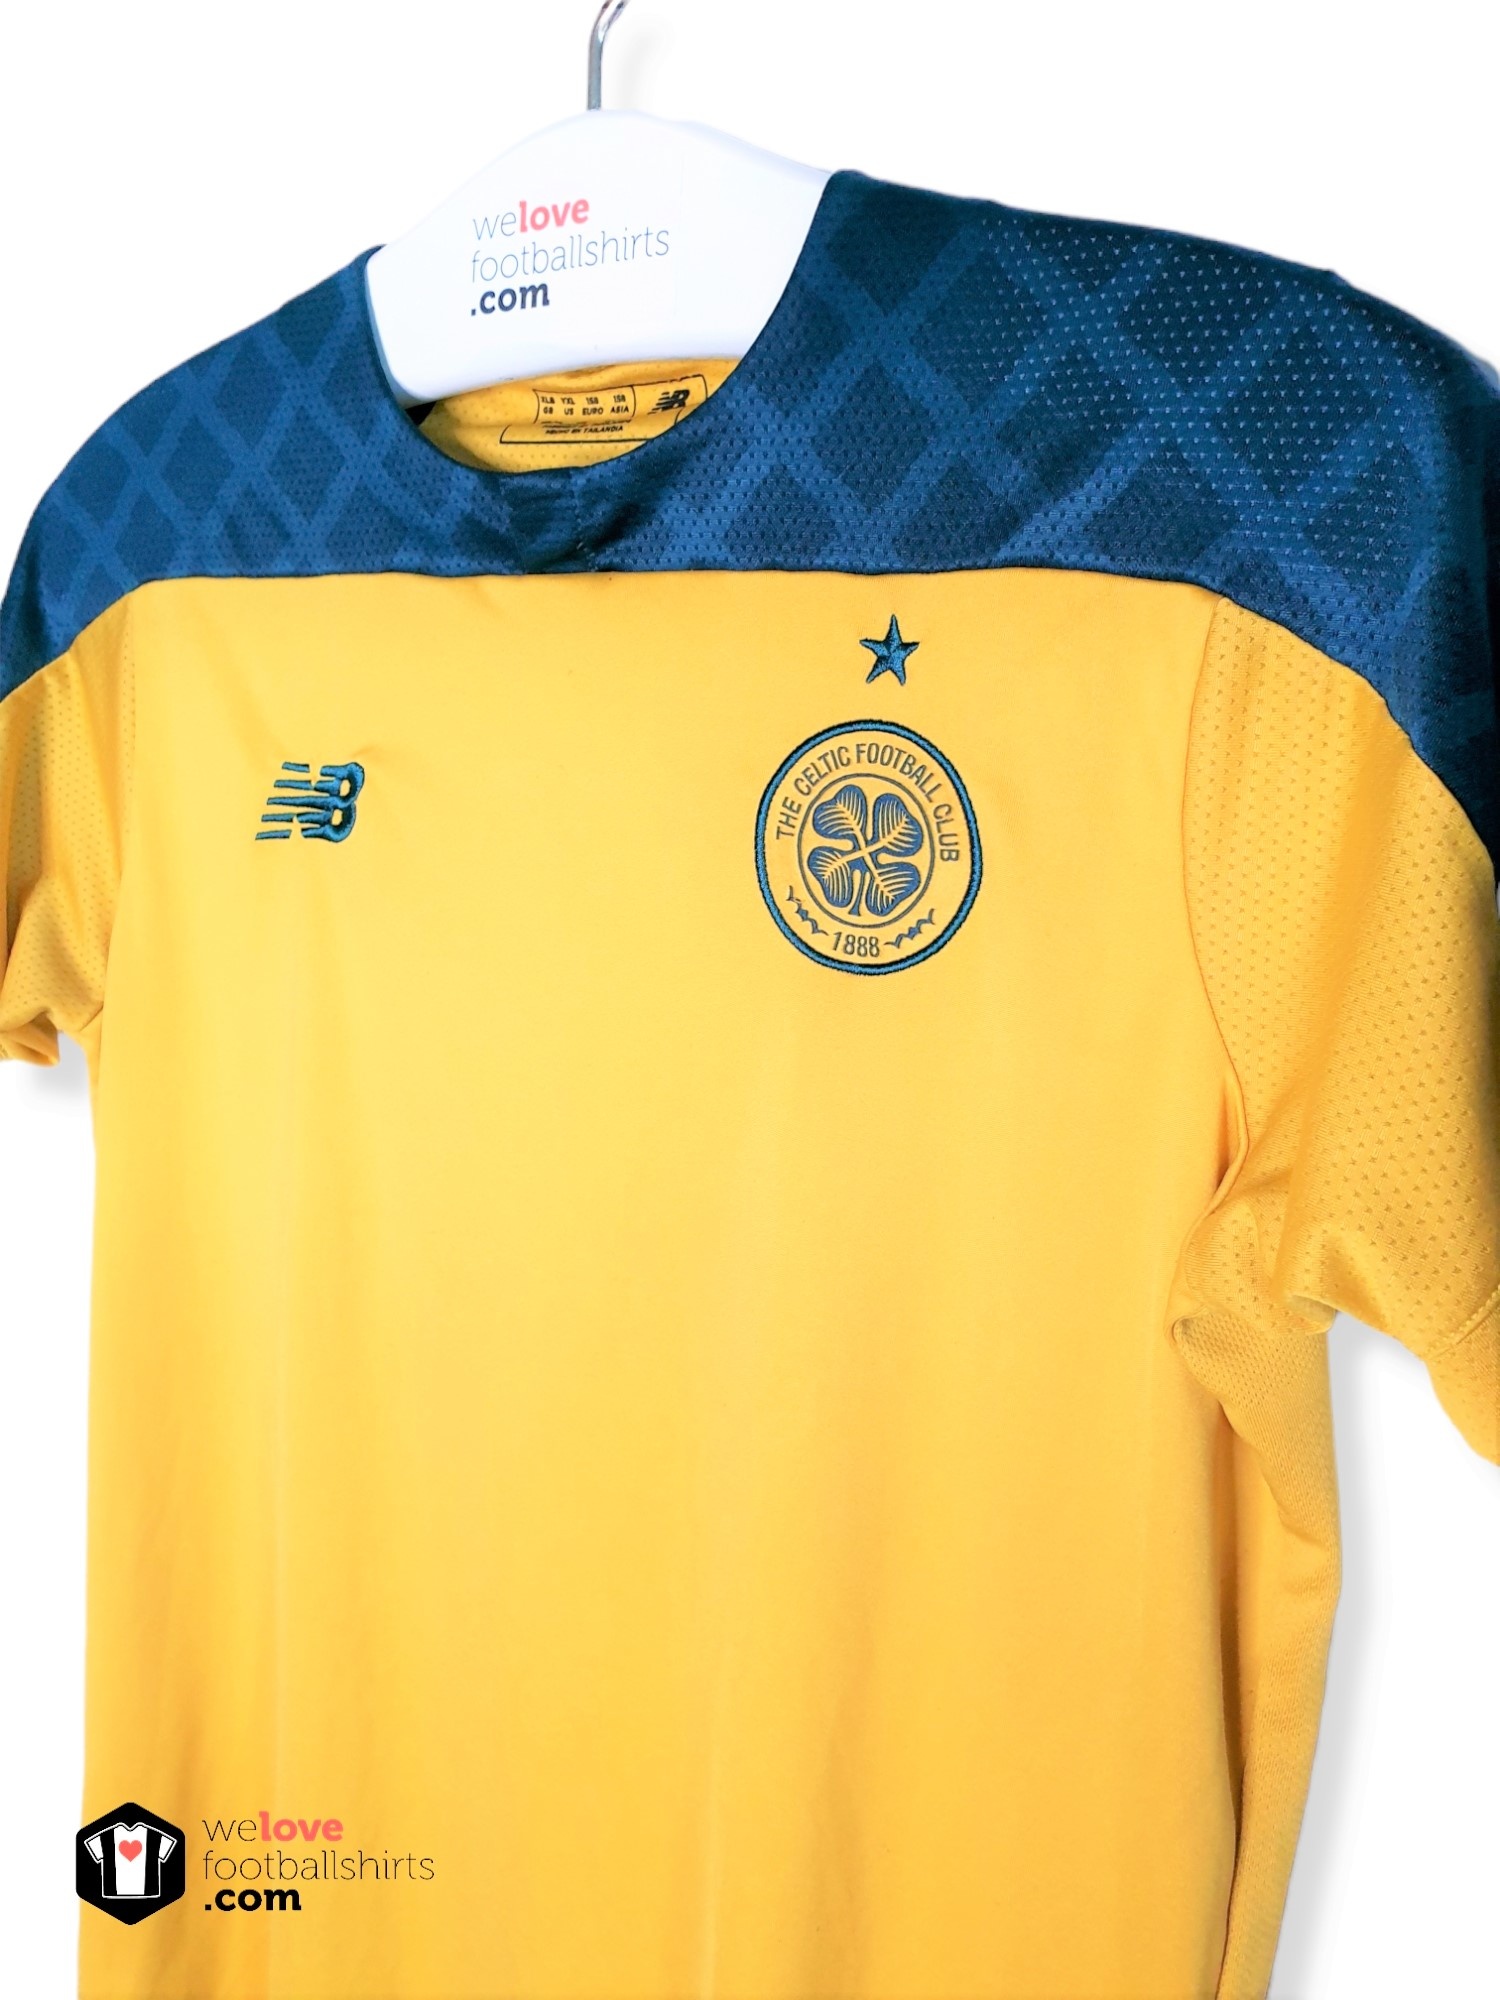 Celtic FC New Balance 2019/20 Away Jersey Kit Shirt Yellow New with Tags